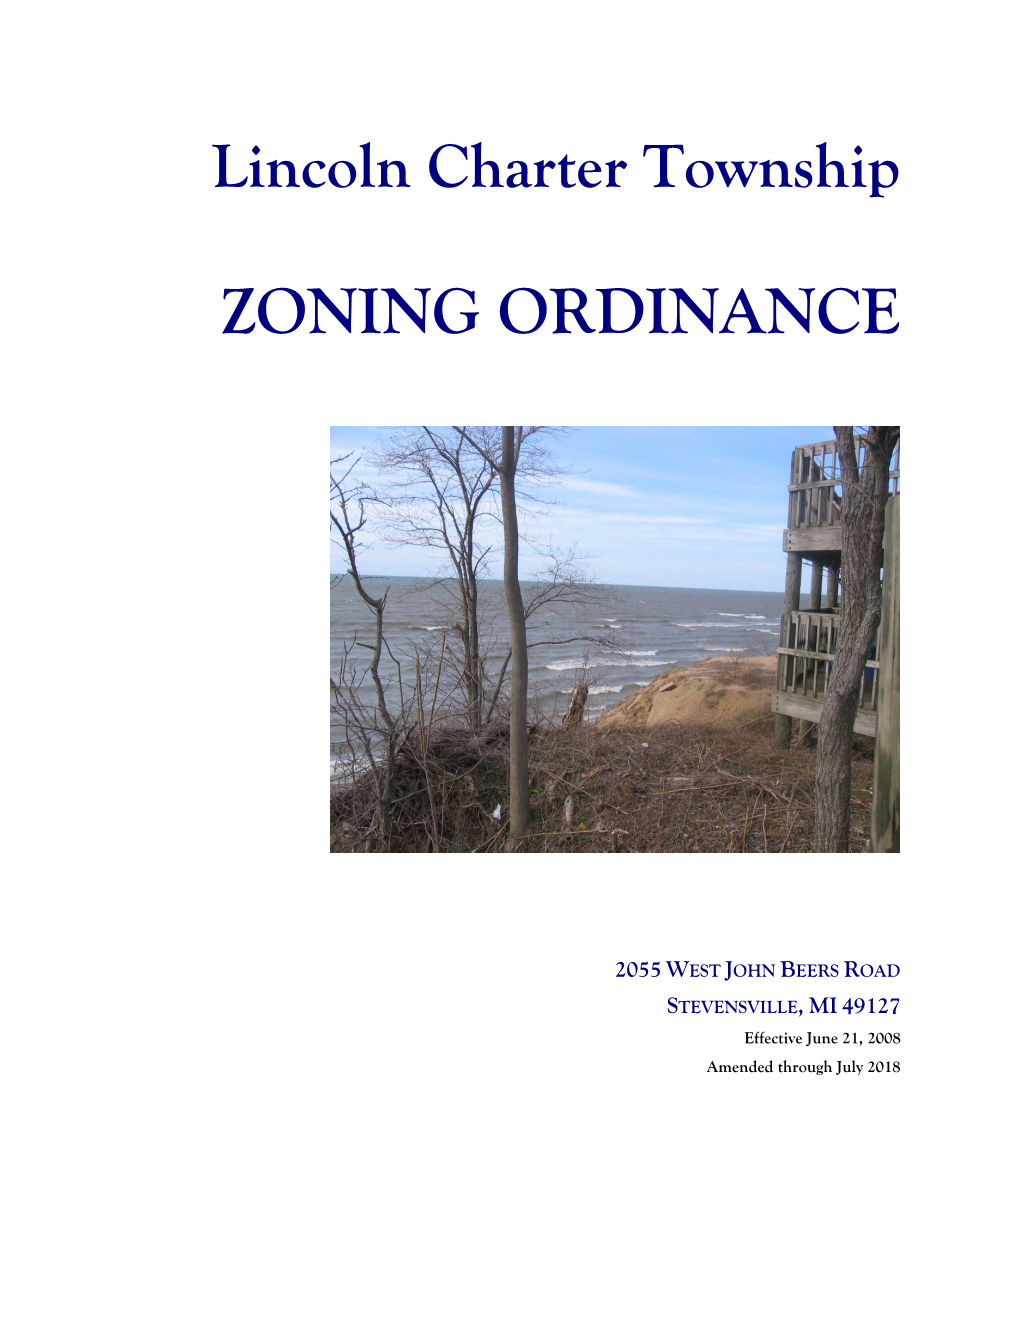 Lincoln Charter Township Zoning Ordinance